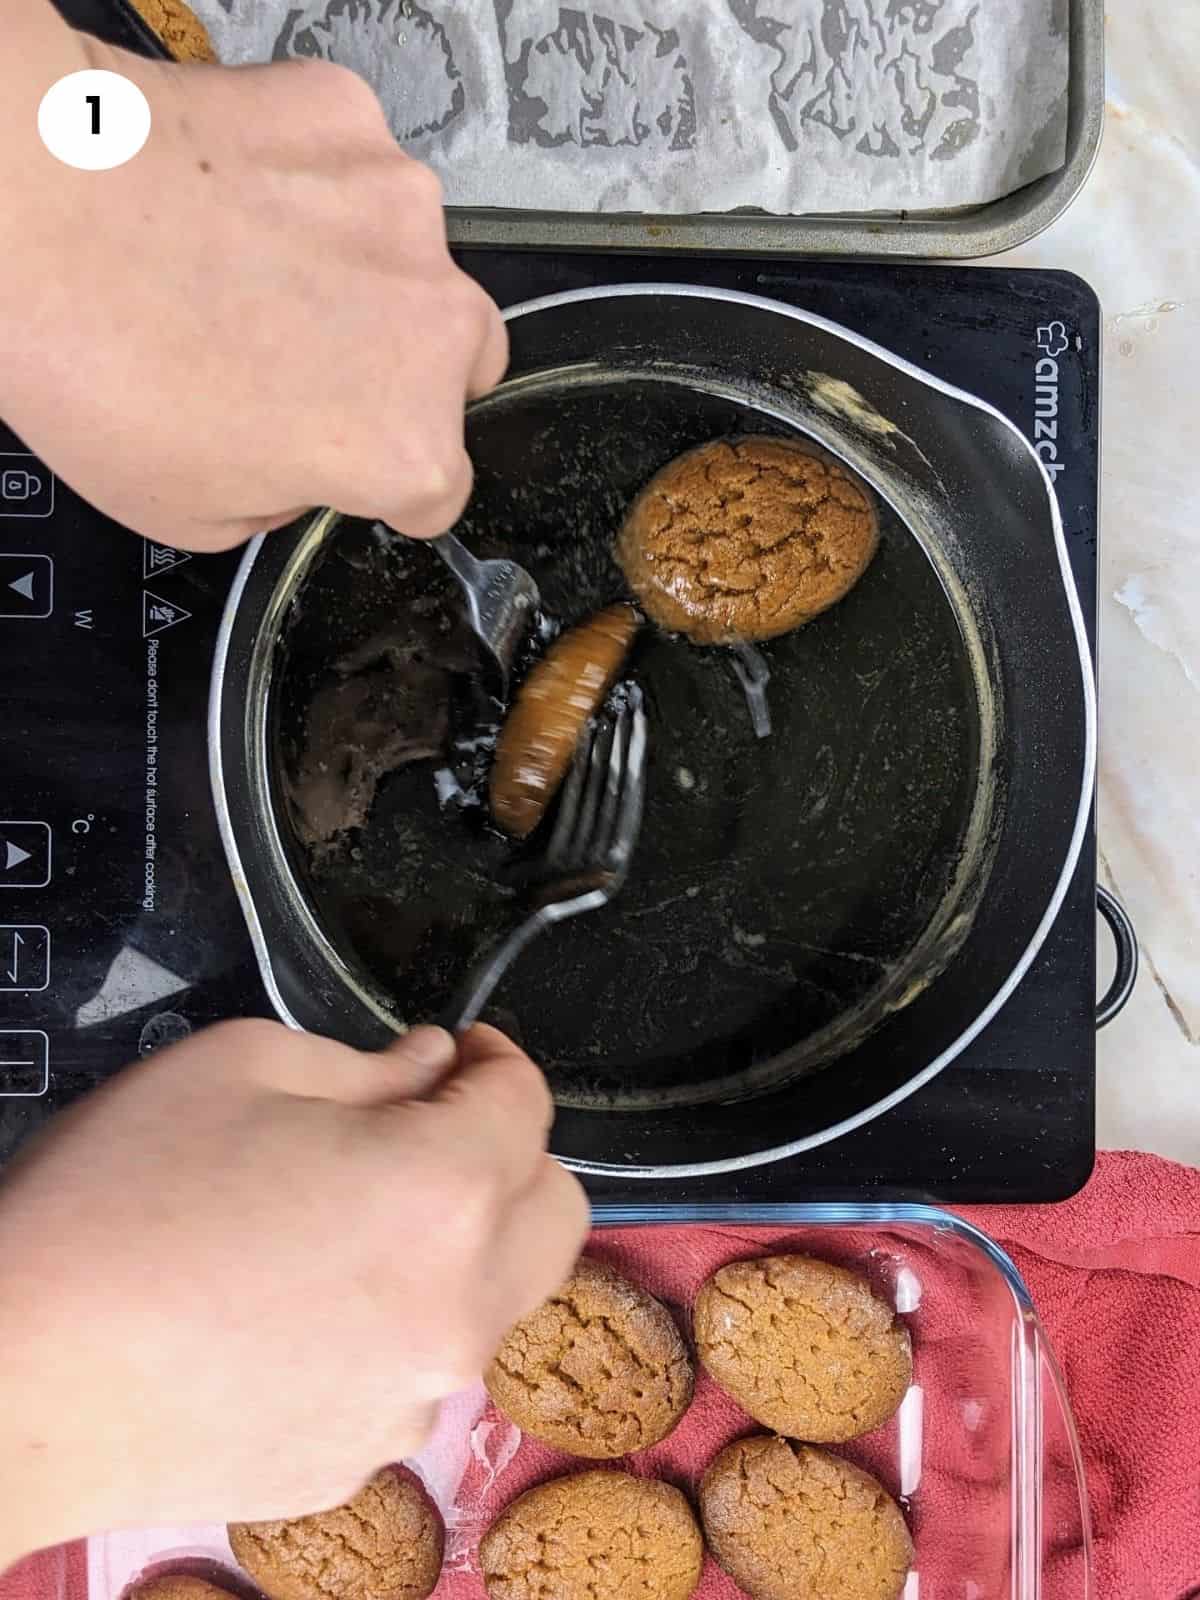 Dipping the melomakarona cookies in syrup